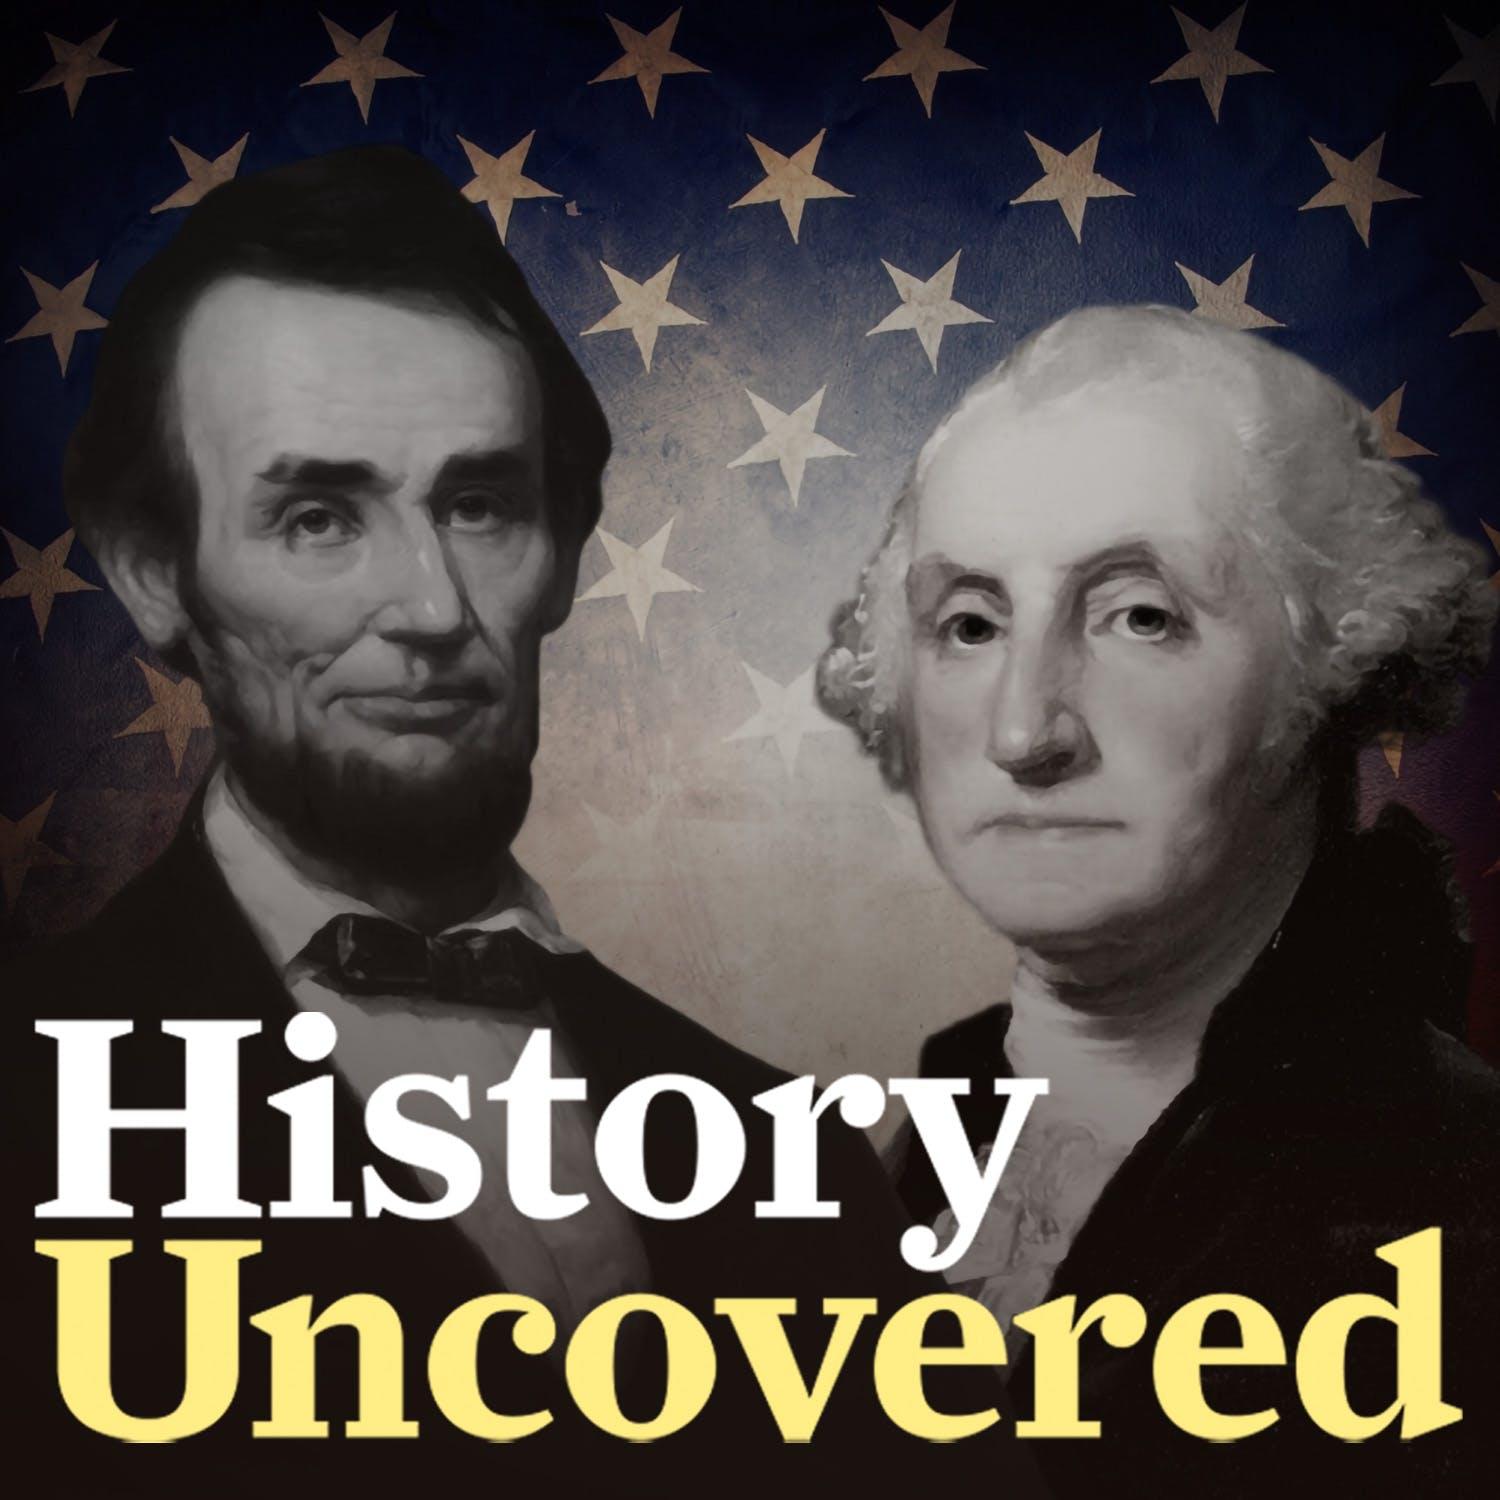 Fun Facts About George Washington And Abraham Lincoln